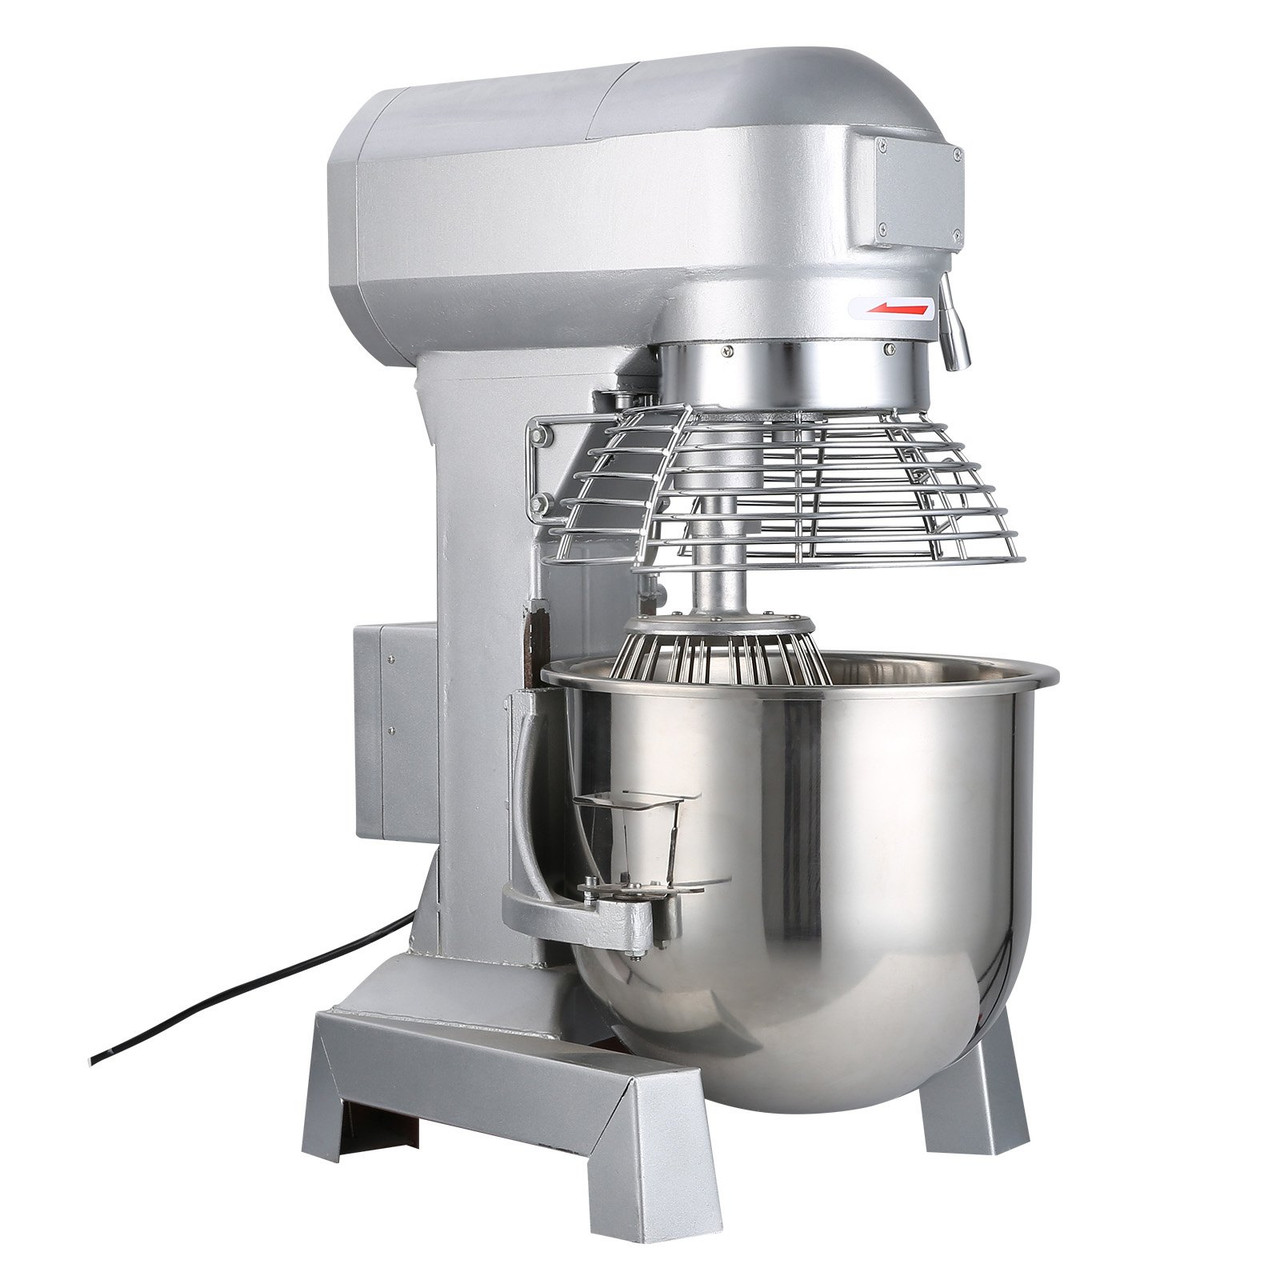 VEVOR Commercial Food Mixer 20Qt 750W 3 Speeds Adjustable 105 180 and 408 RPM Food Processor Heavy Duty with Stainless Steel Bowl Dough Hooks Whisk Beater for Schools Bakeries Restaurants Pizzeria